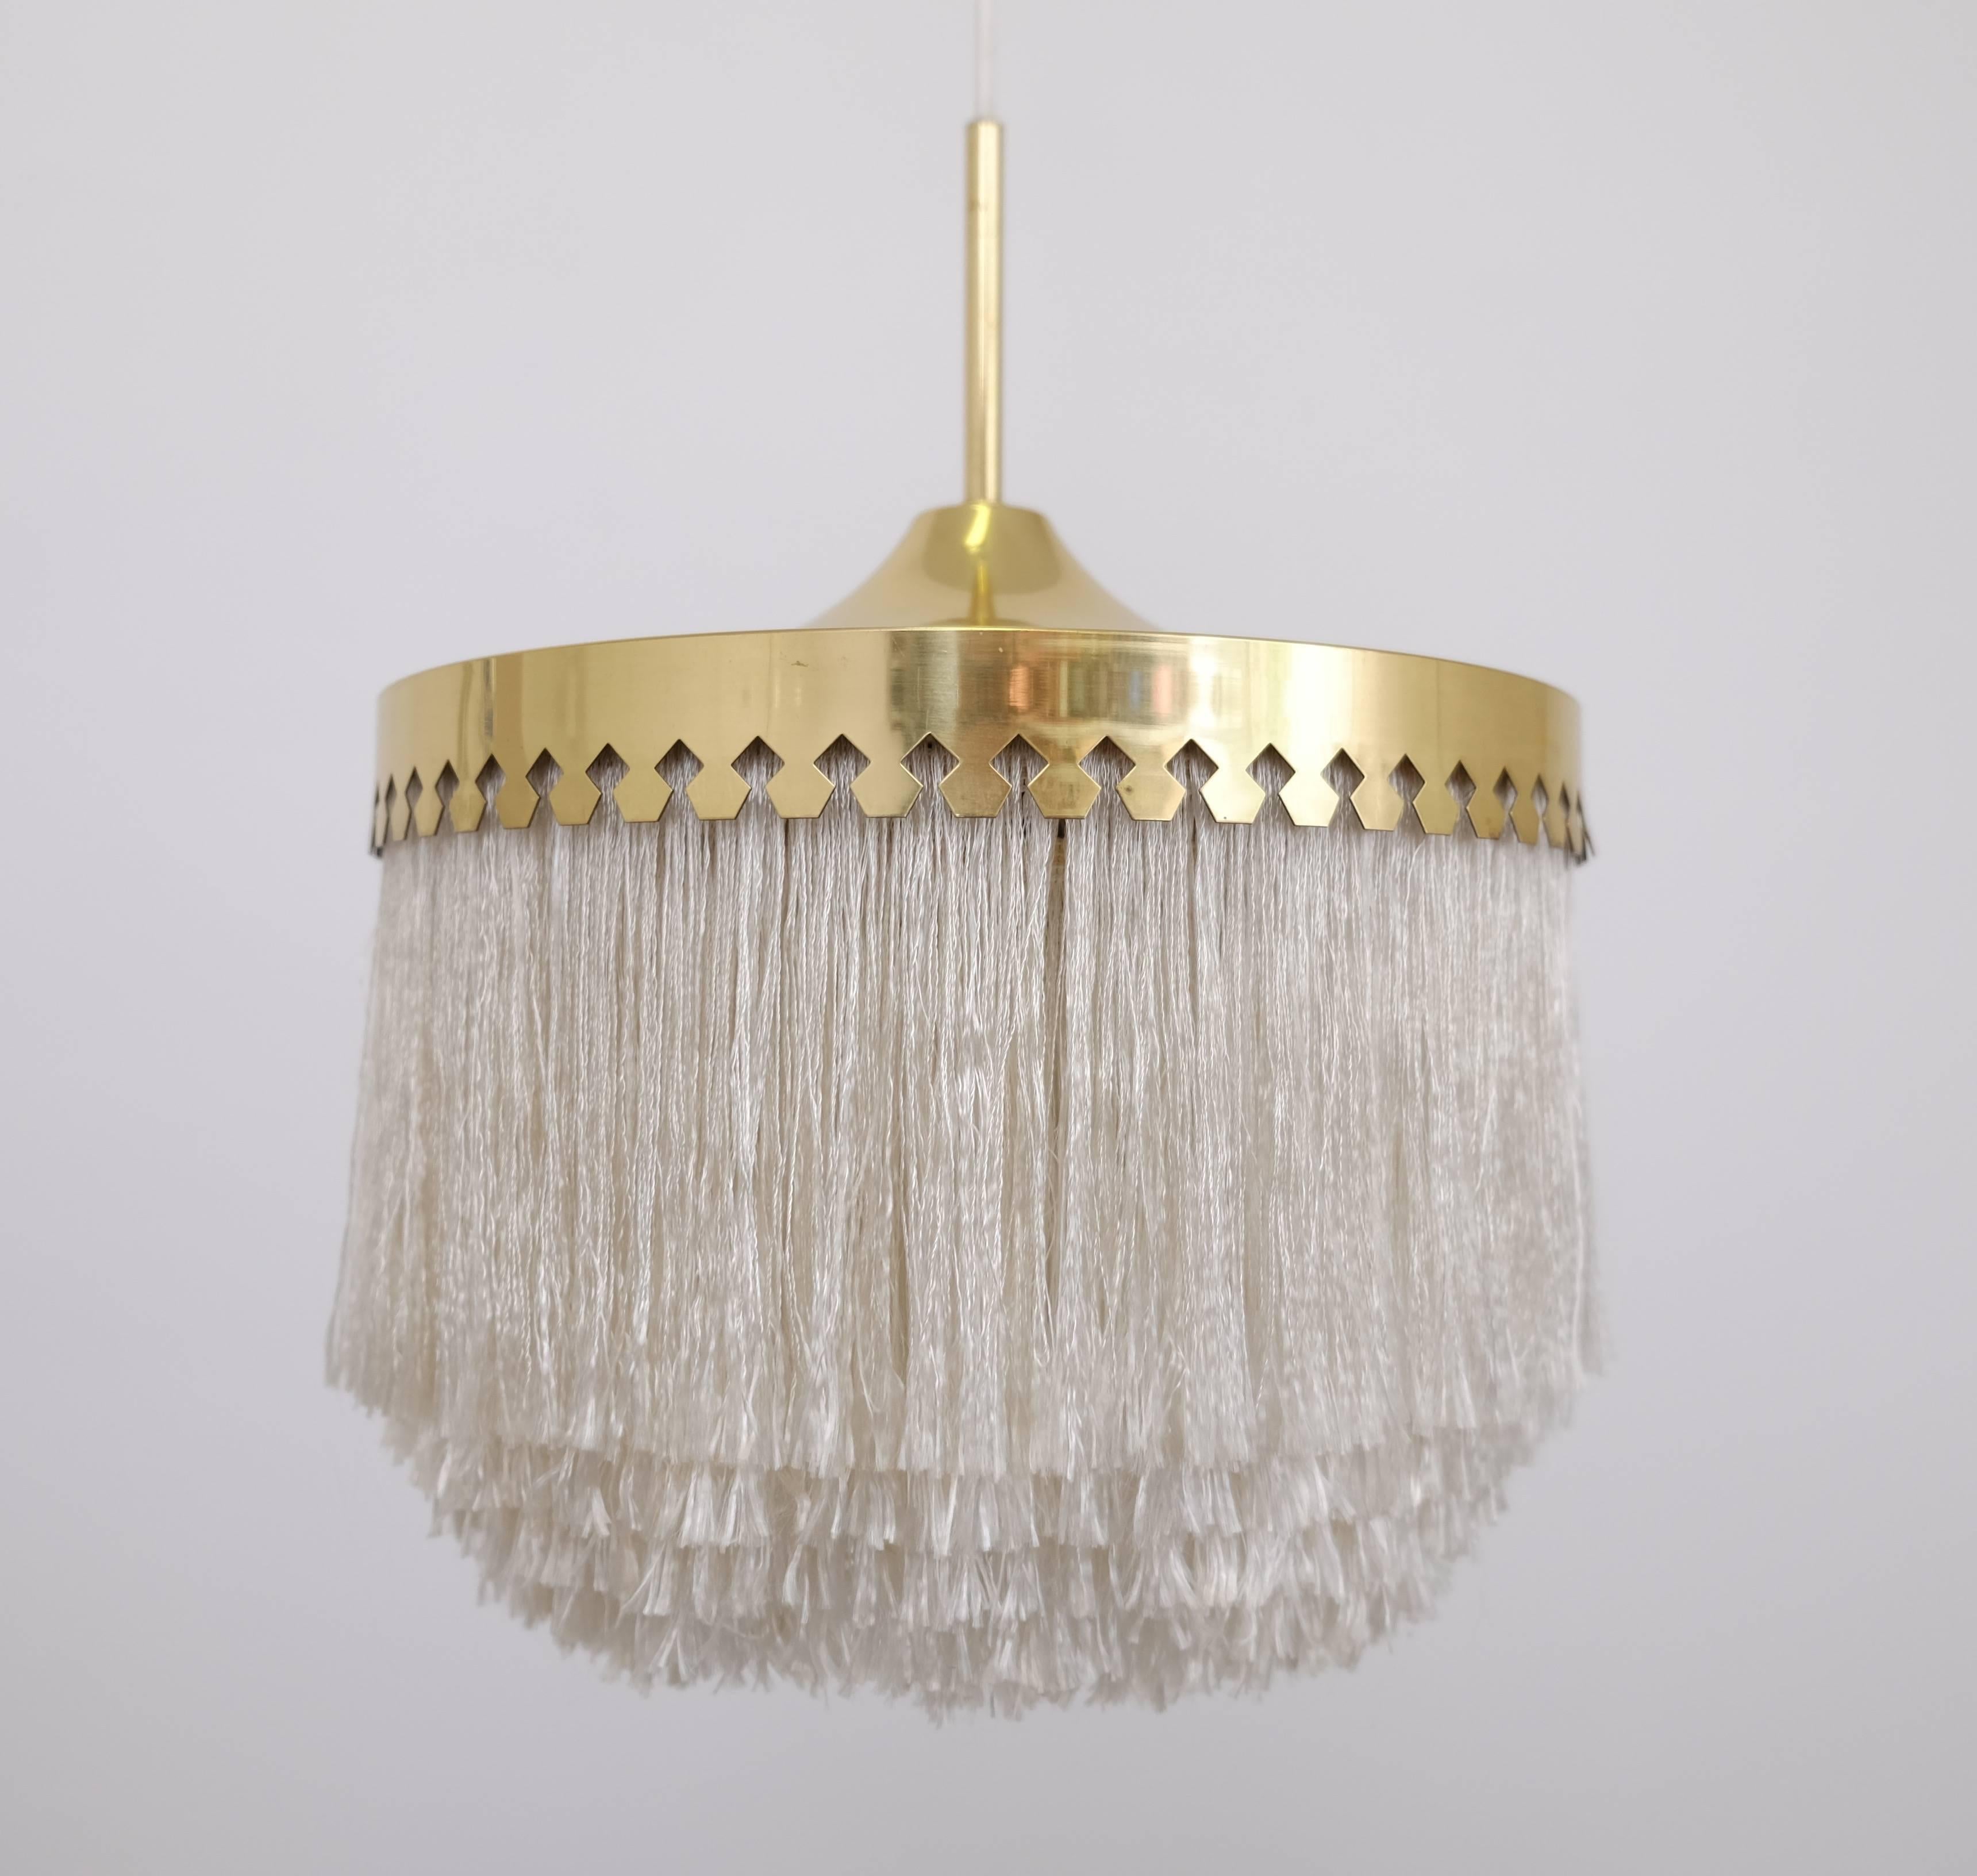 White fringes pendant light with brass frame.
Fitted with one E27 socket. Height of the lamp only from bottom of fringes to top of brass crown approximately 36cm. Diameter 28 cm.
The height is adjustable up to 150 cm.